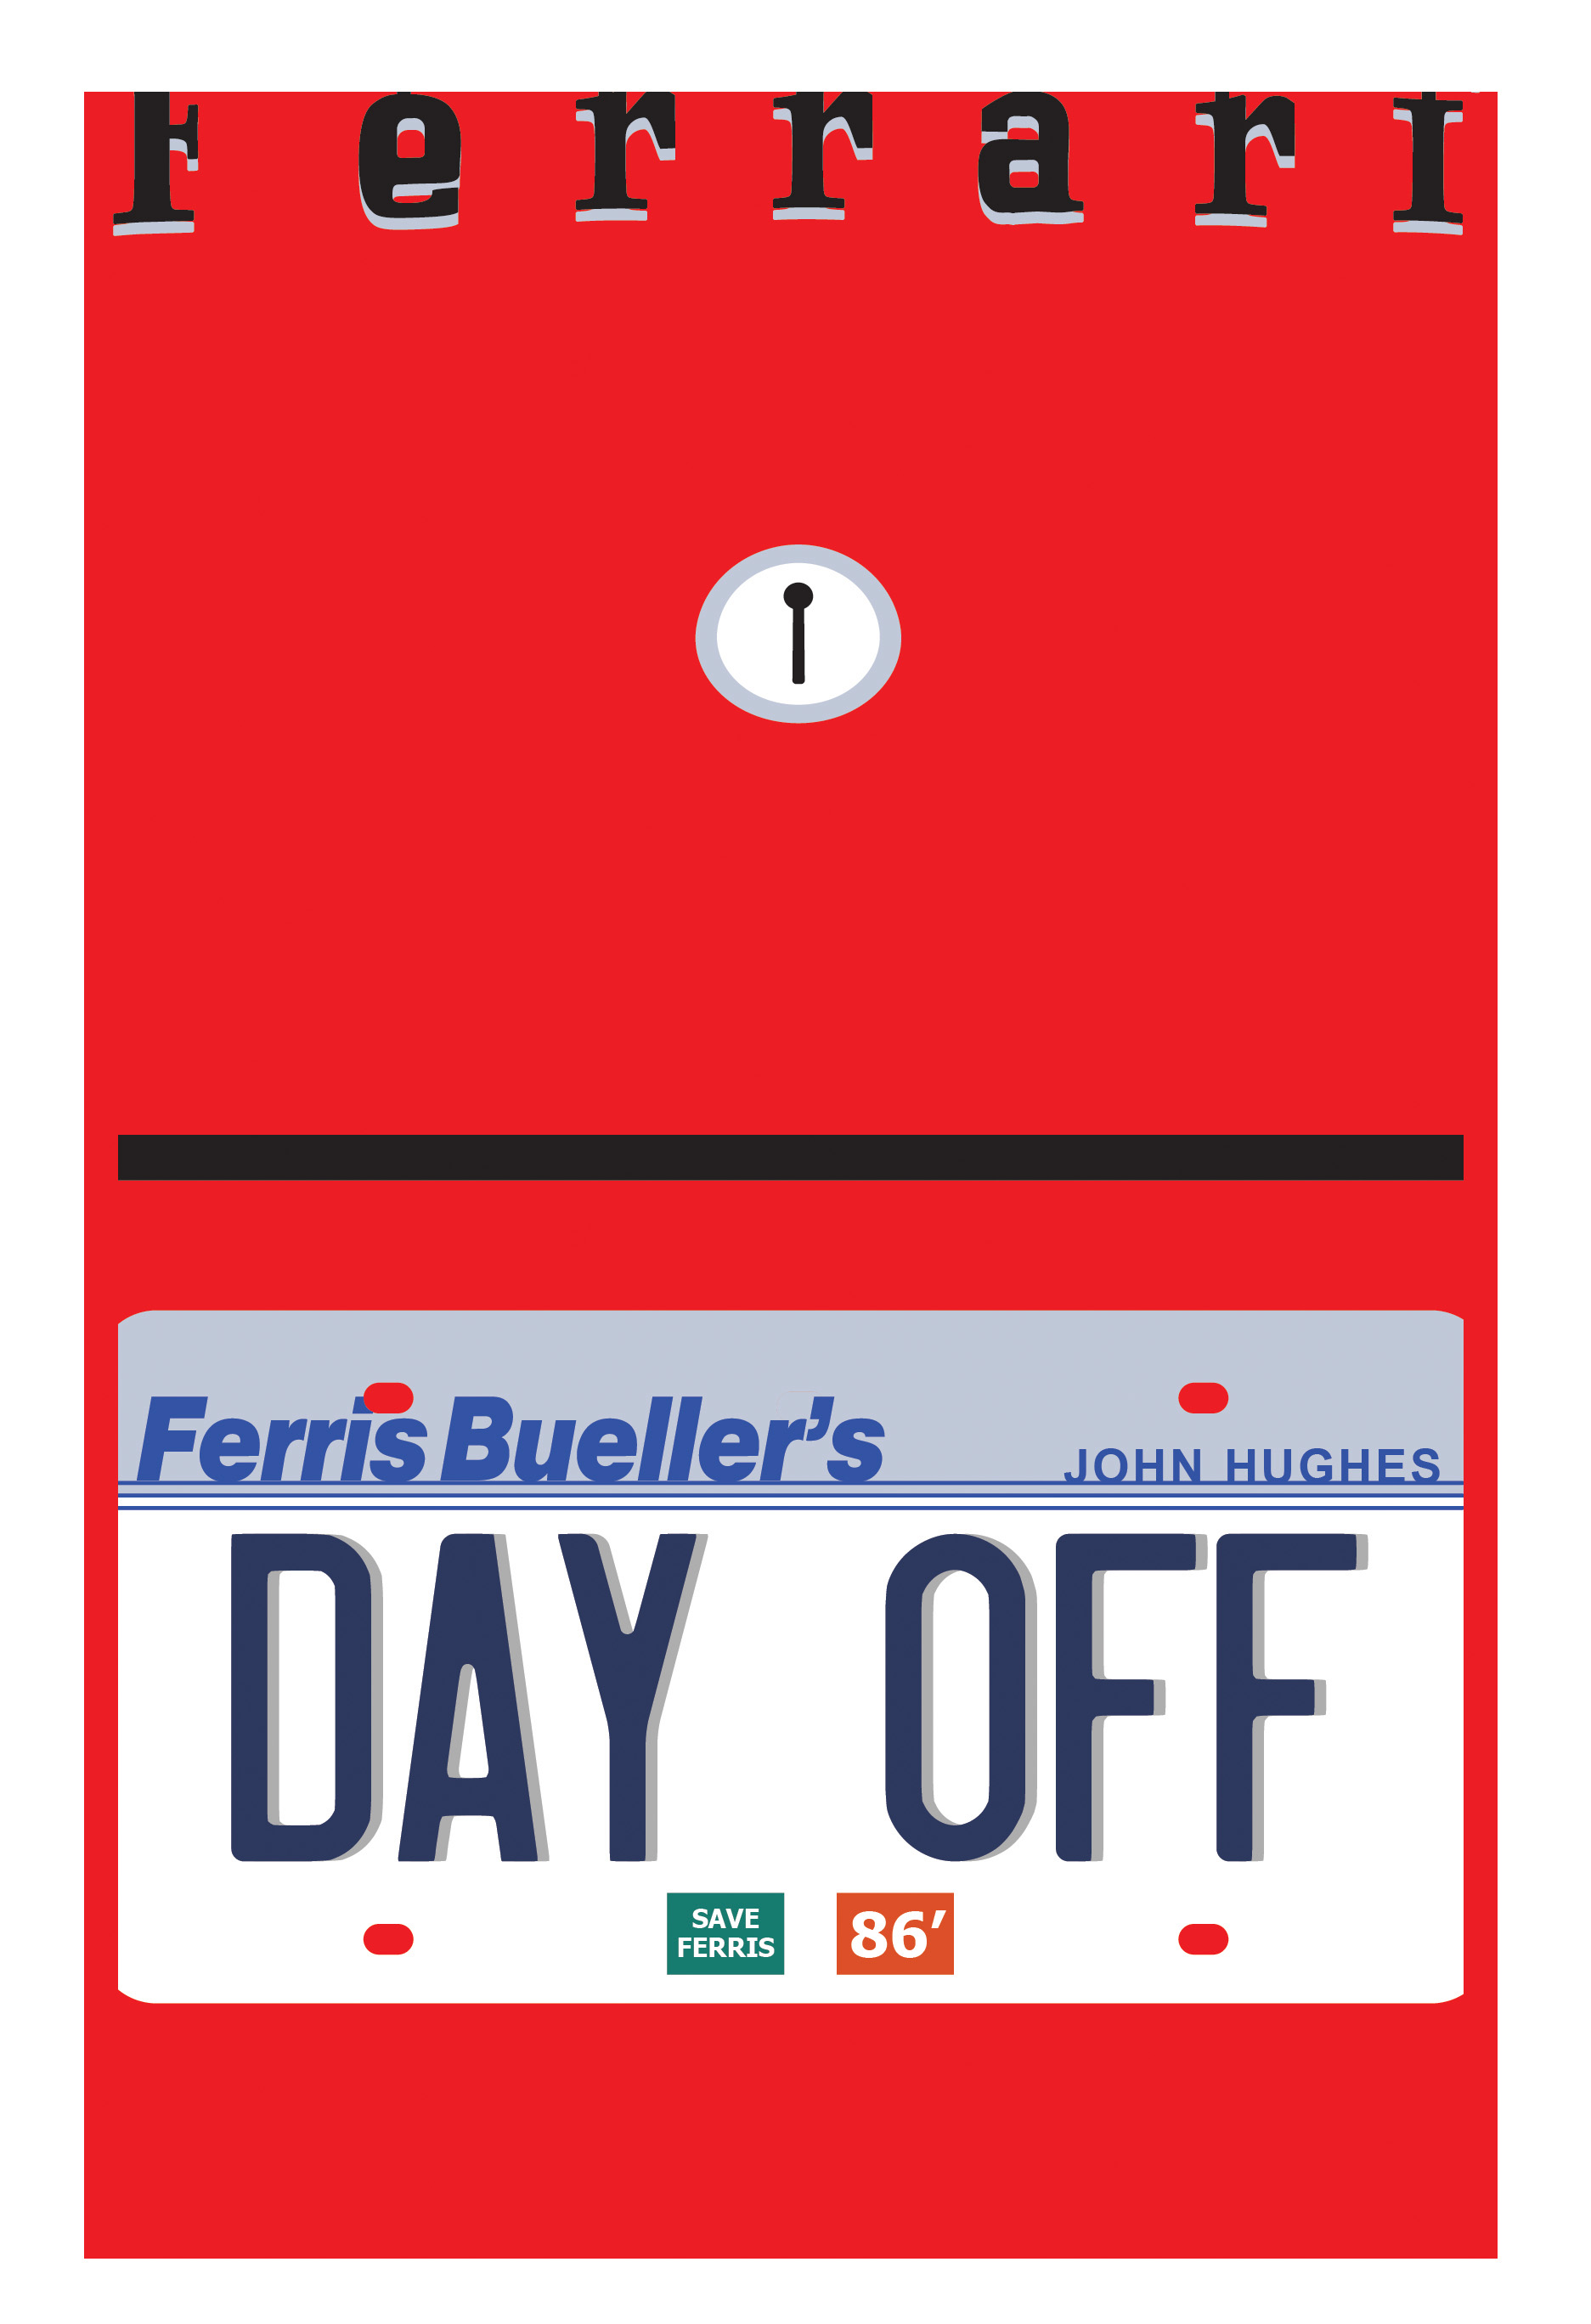 A poster of the film 'Ferris Buellers Day Off' in red and having the title of the film on some licence plates, in homage to the red ferrari from the film.